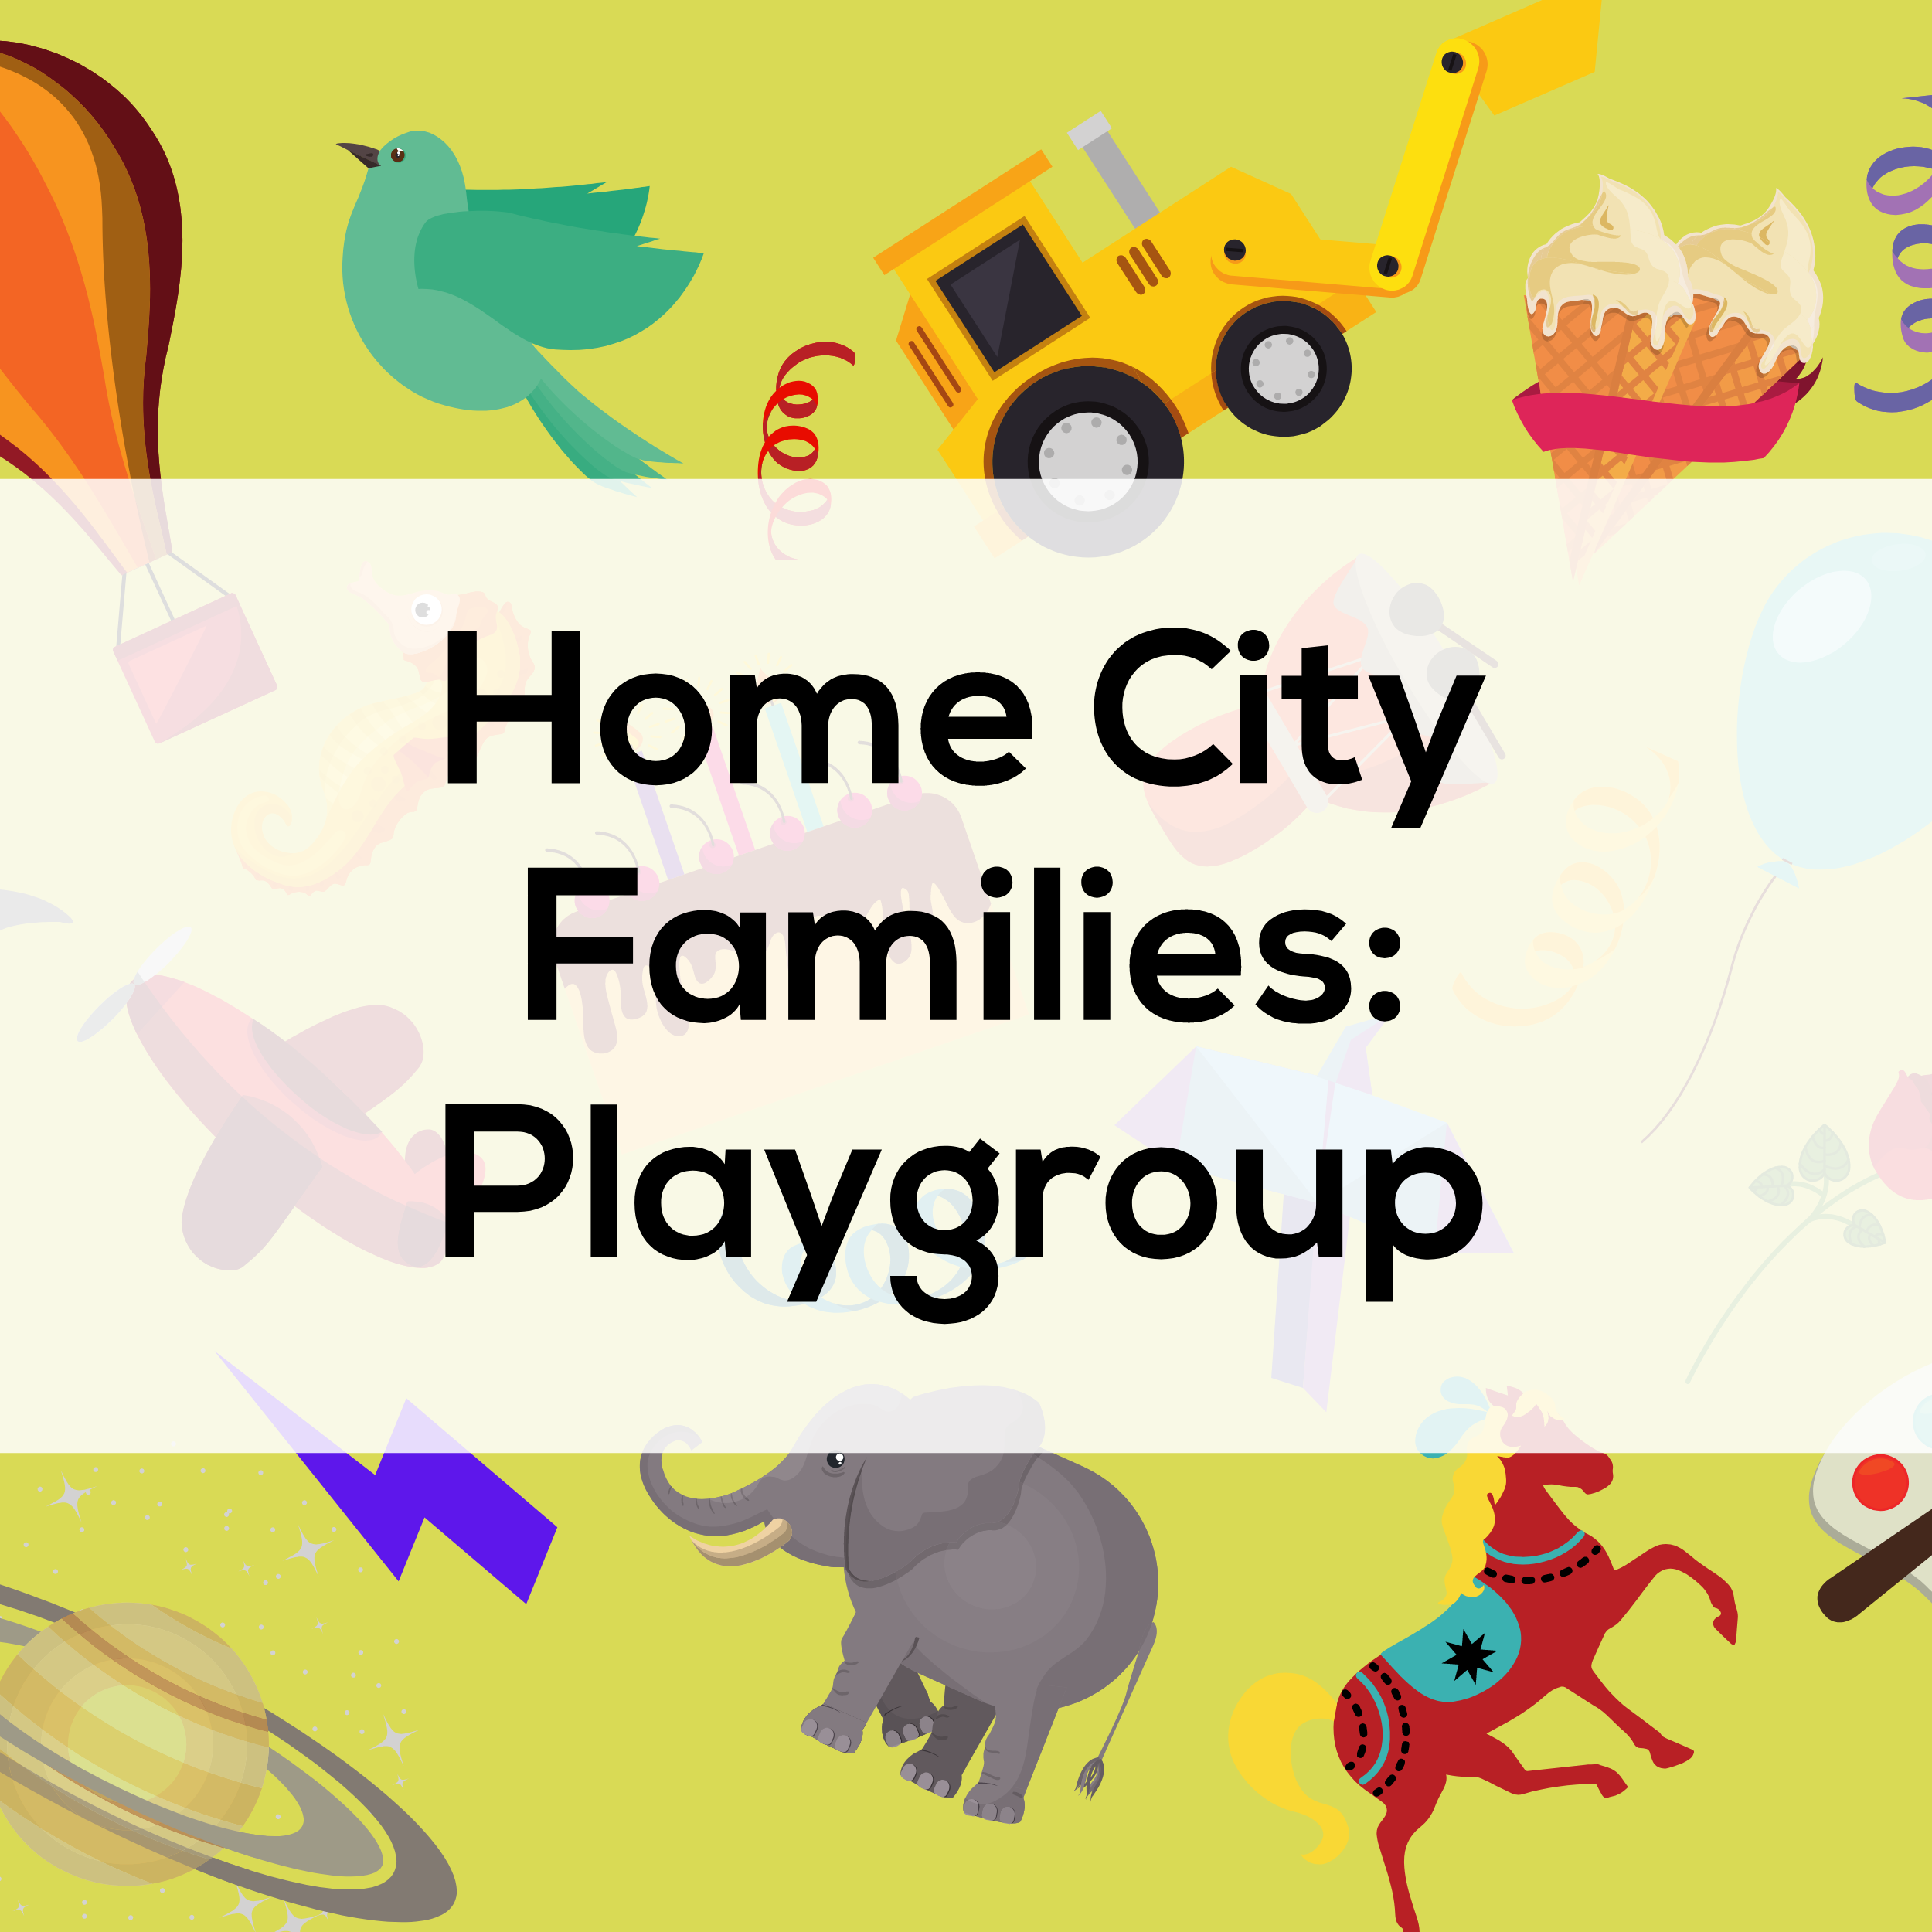 Home City Families: Playgroup